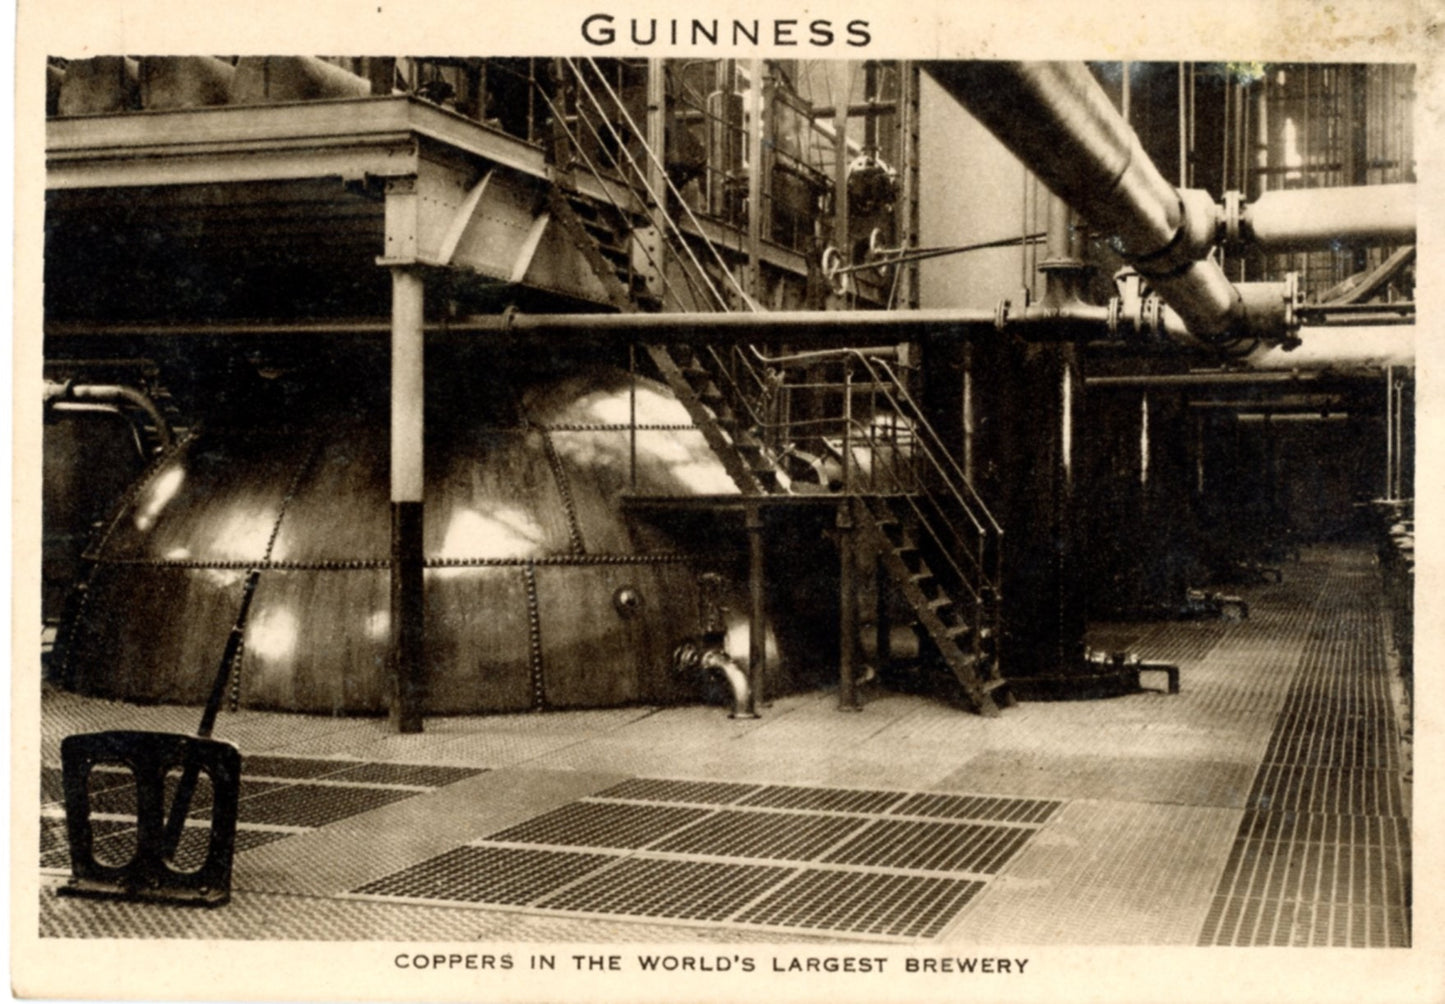 Guinness World's Largest Brewery DUBLIN IRELAND Coppers Vintage Linen Postcard ©1940's